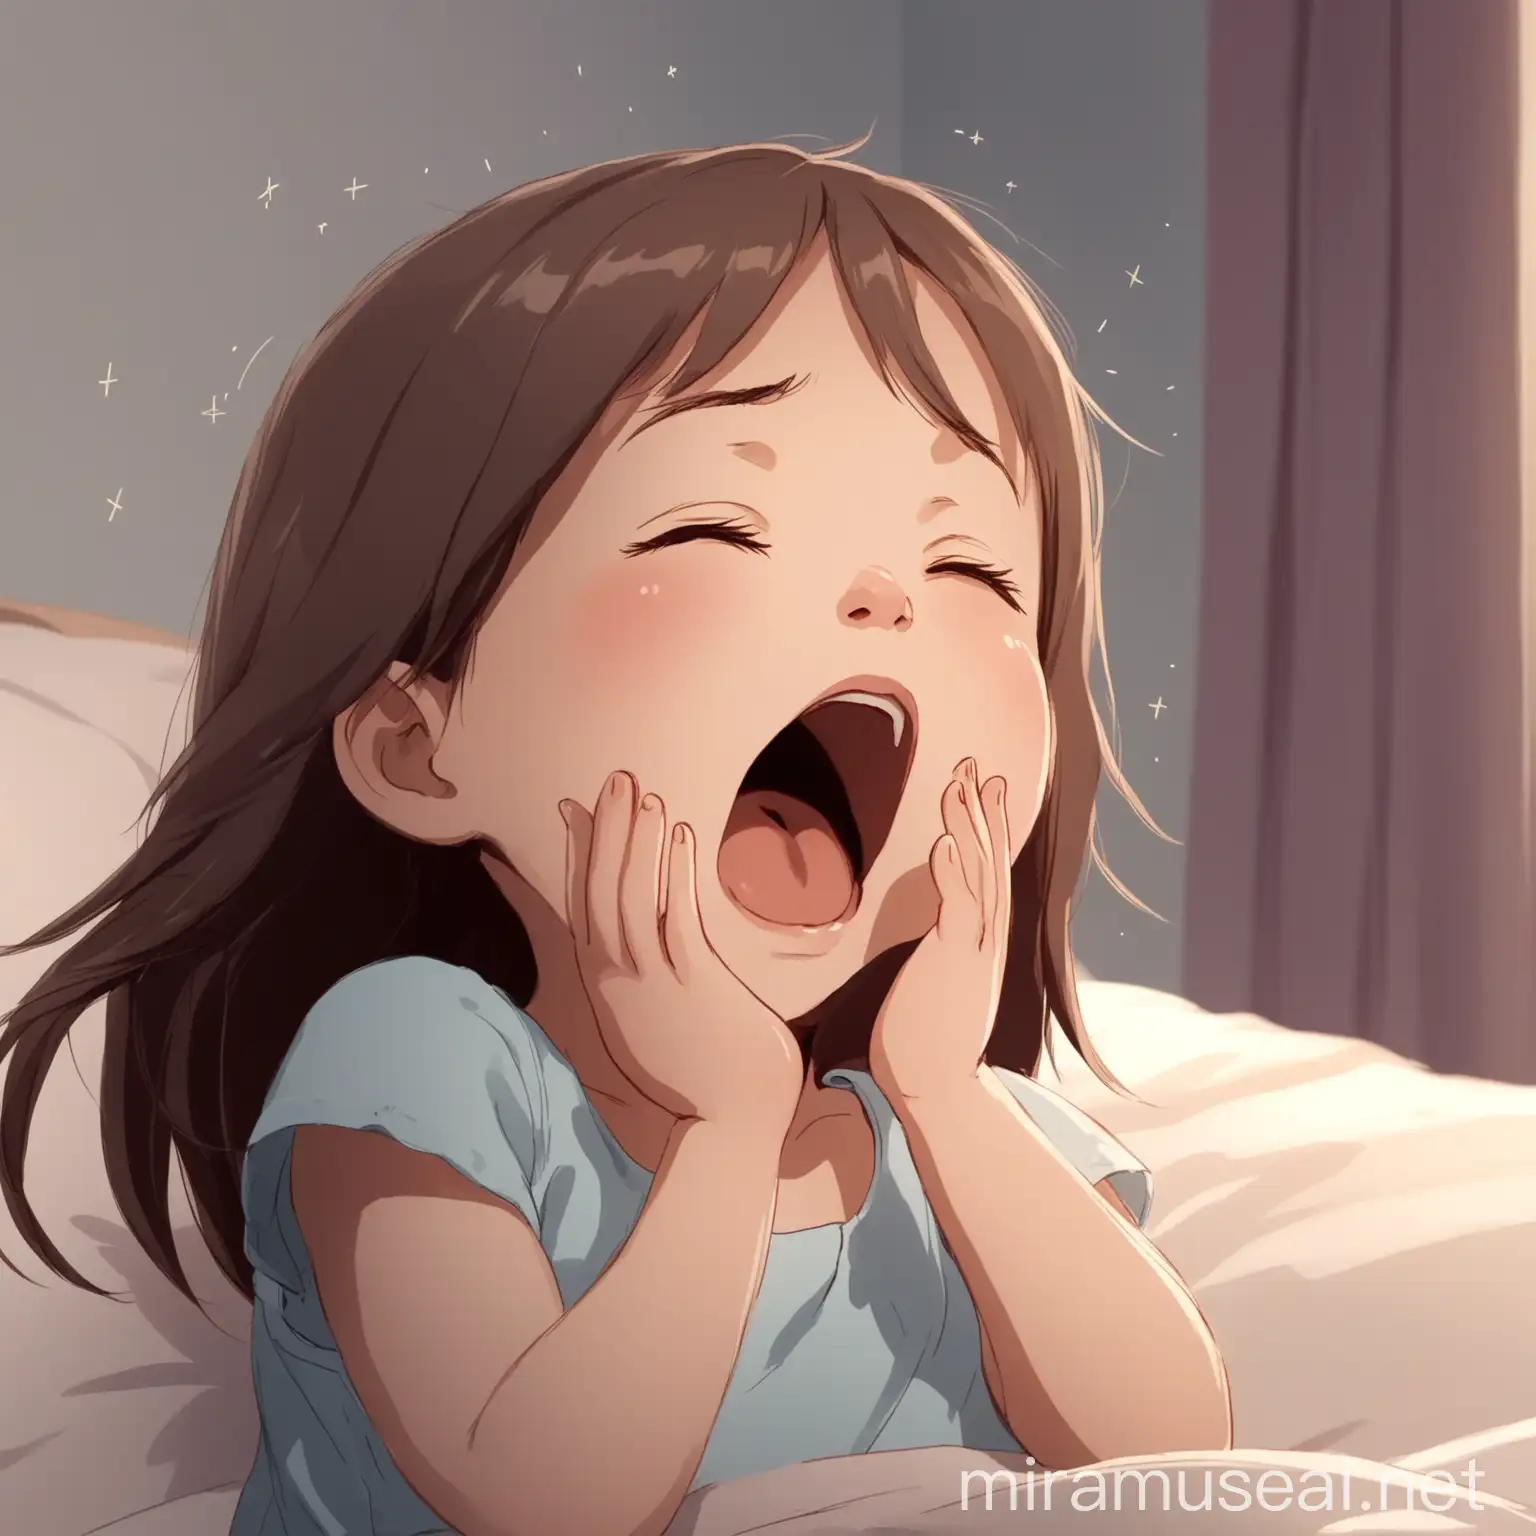 Adorable Animated Little Girl Yawning in the Early Morning Light